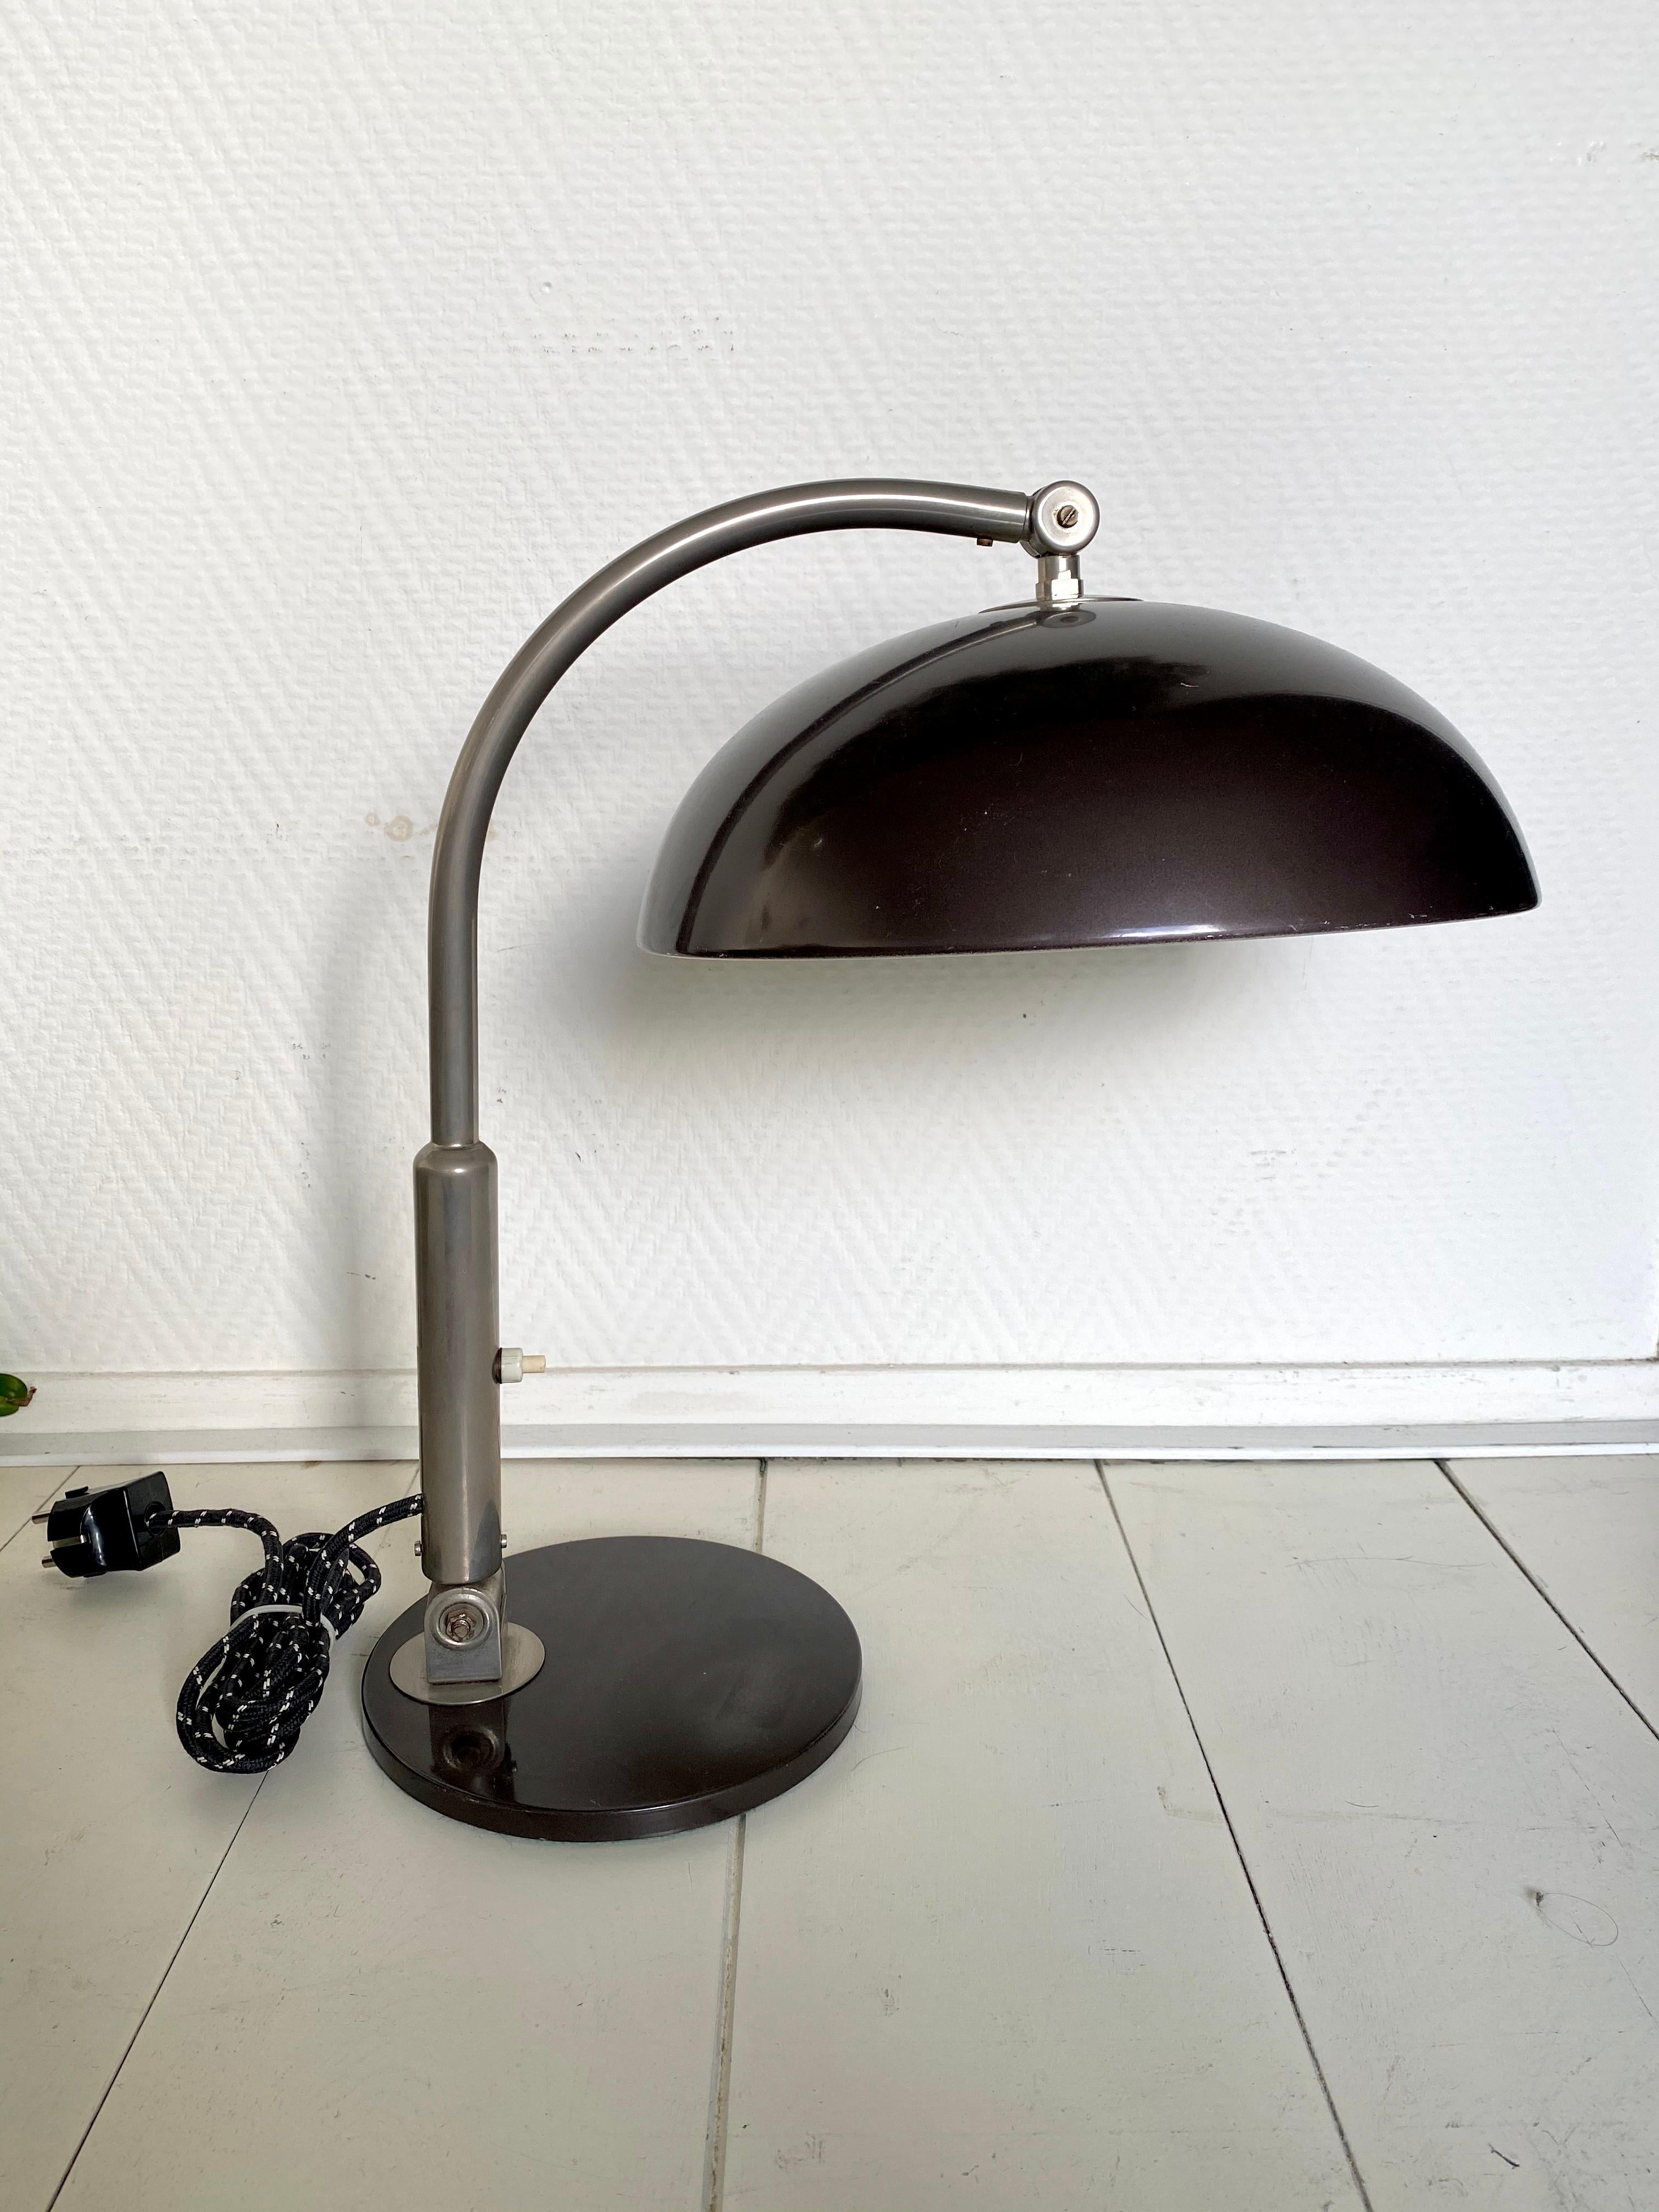 Popular lamp which was designed by Busquet and manufactured by Hala in Holland, circa 1960s. This piece features a dark brown shade and base. It can be positioned in different ways. Remains in good functional condition with some scratches to the